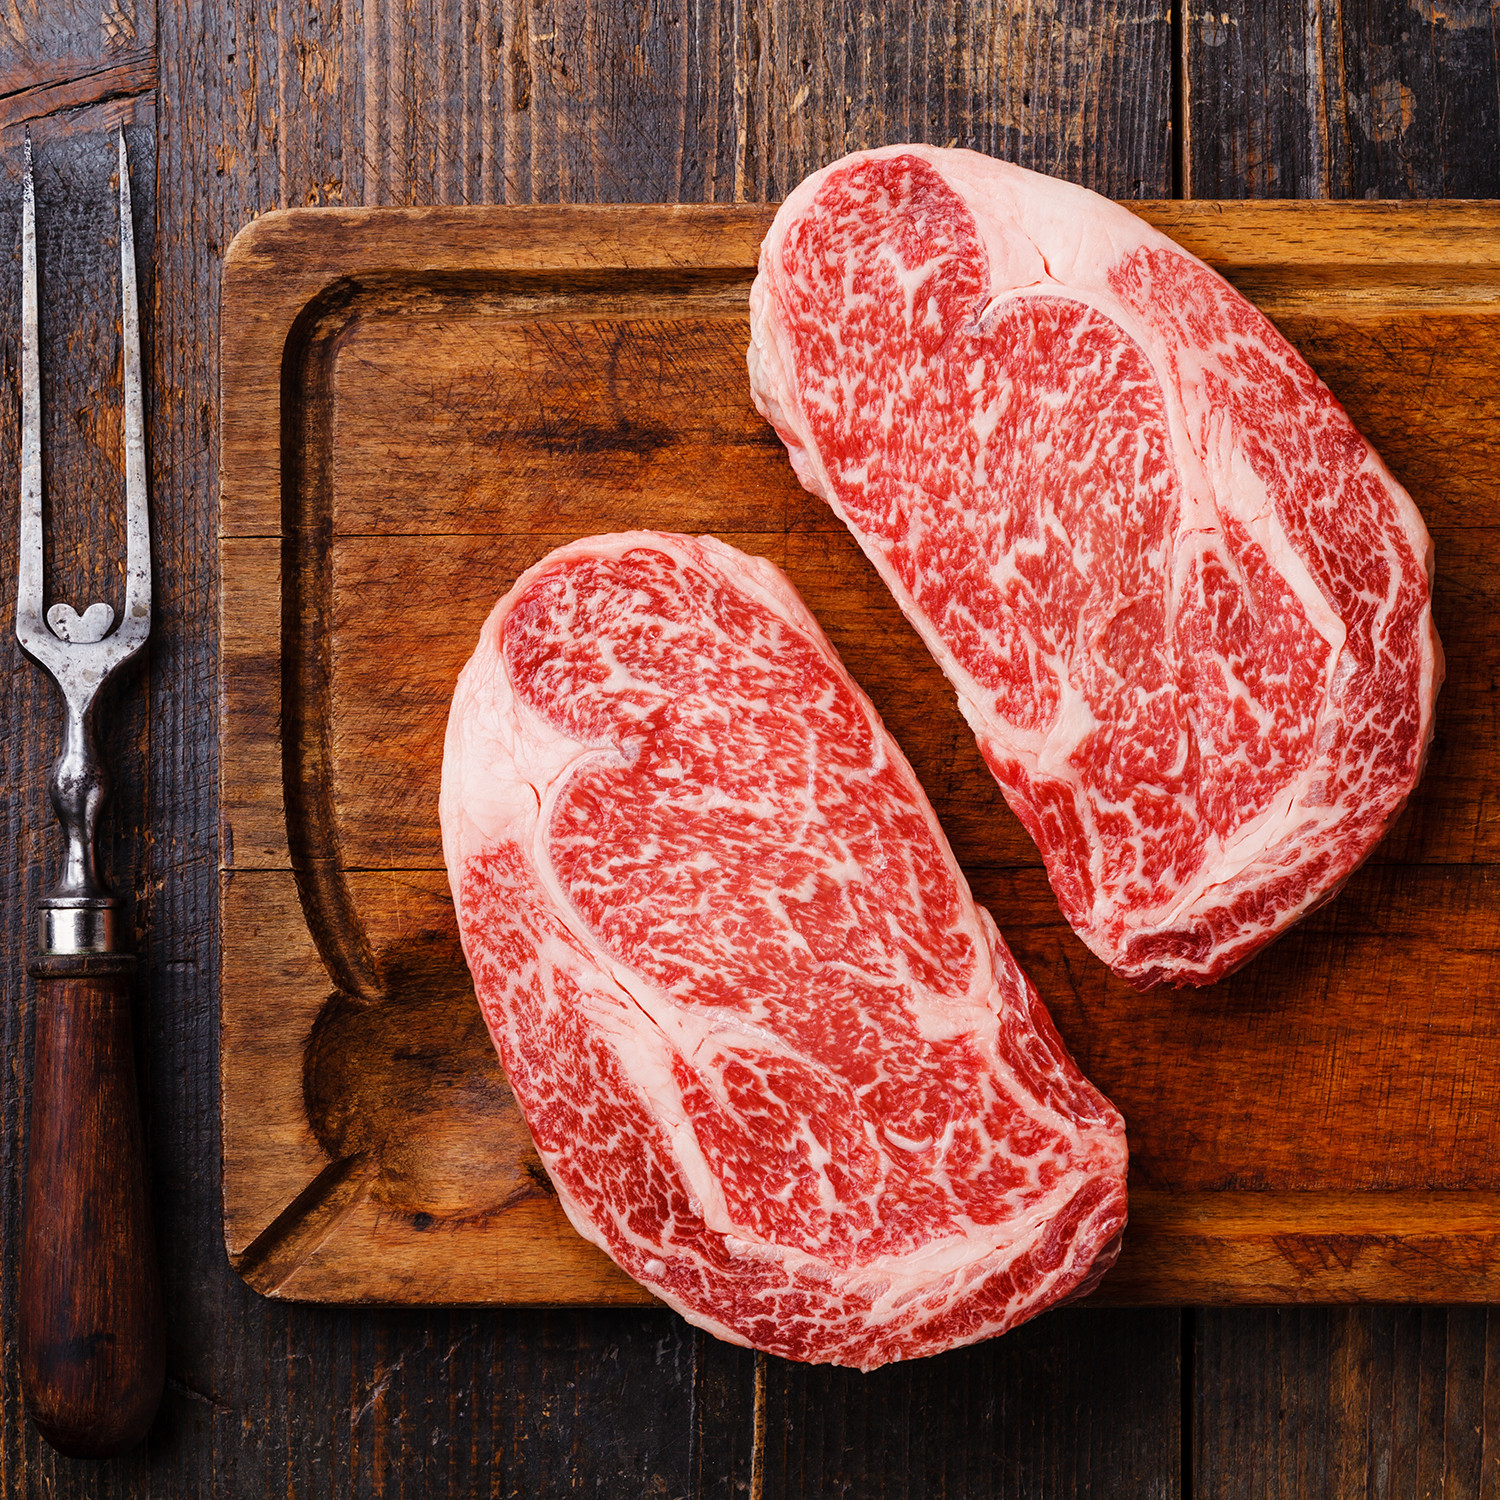 What Is Upper Prime? – Holy Grail Steak Co.